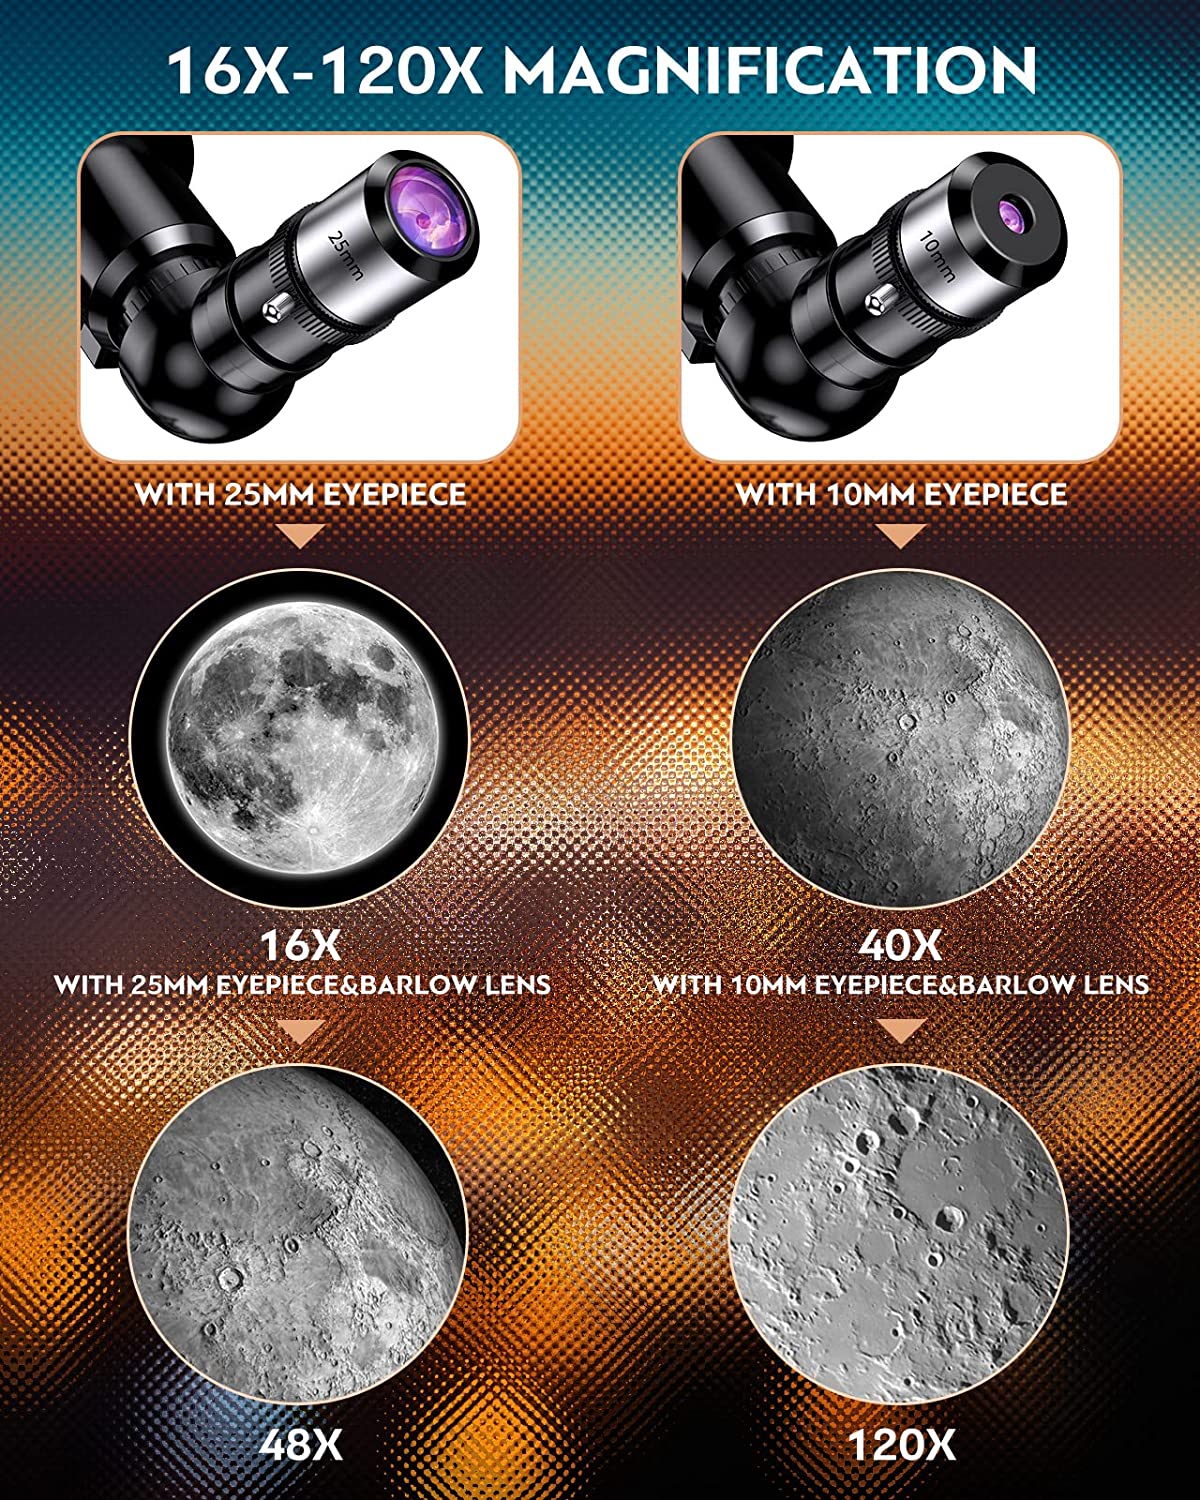 SUGIFT Telescope for Kids and Beginners 70mm Aperture 400mm AZ Mount Telescope with Tripod, Silver - image 3 of 7